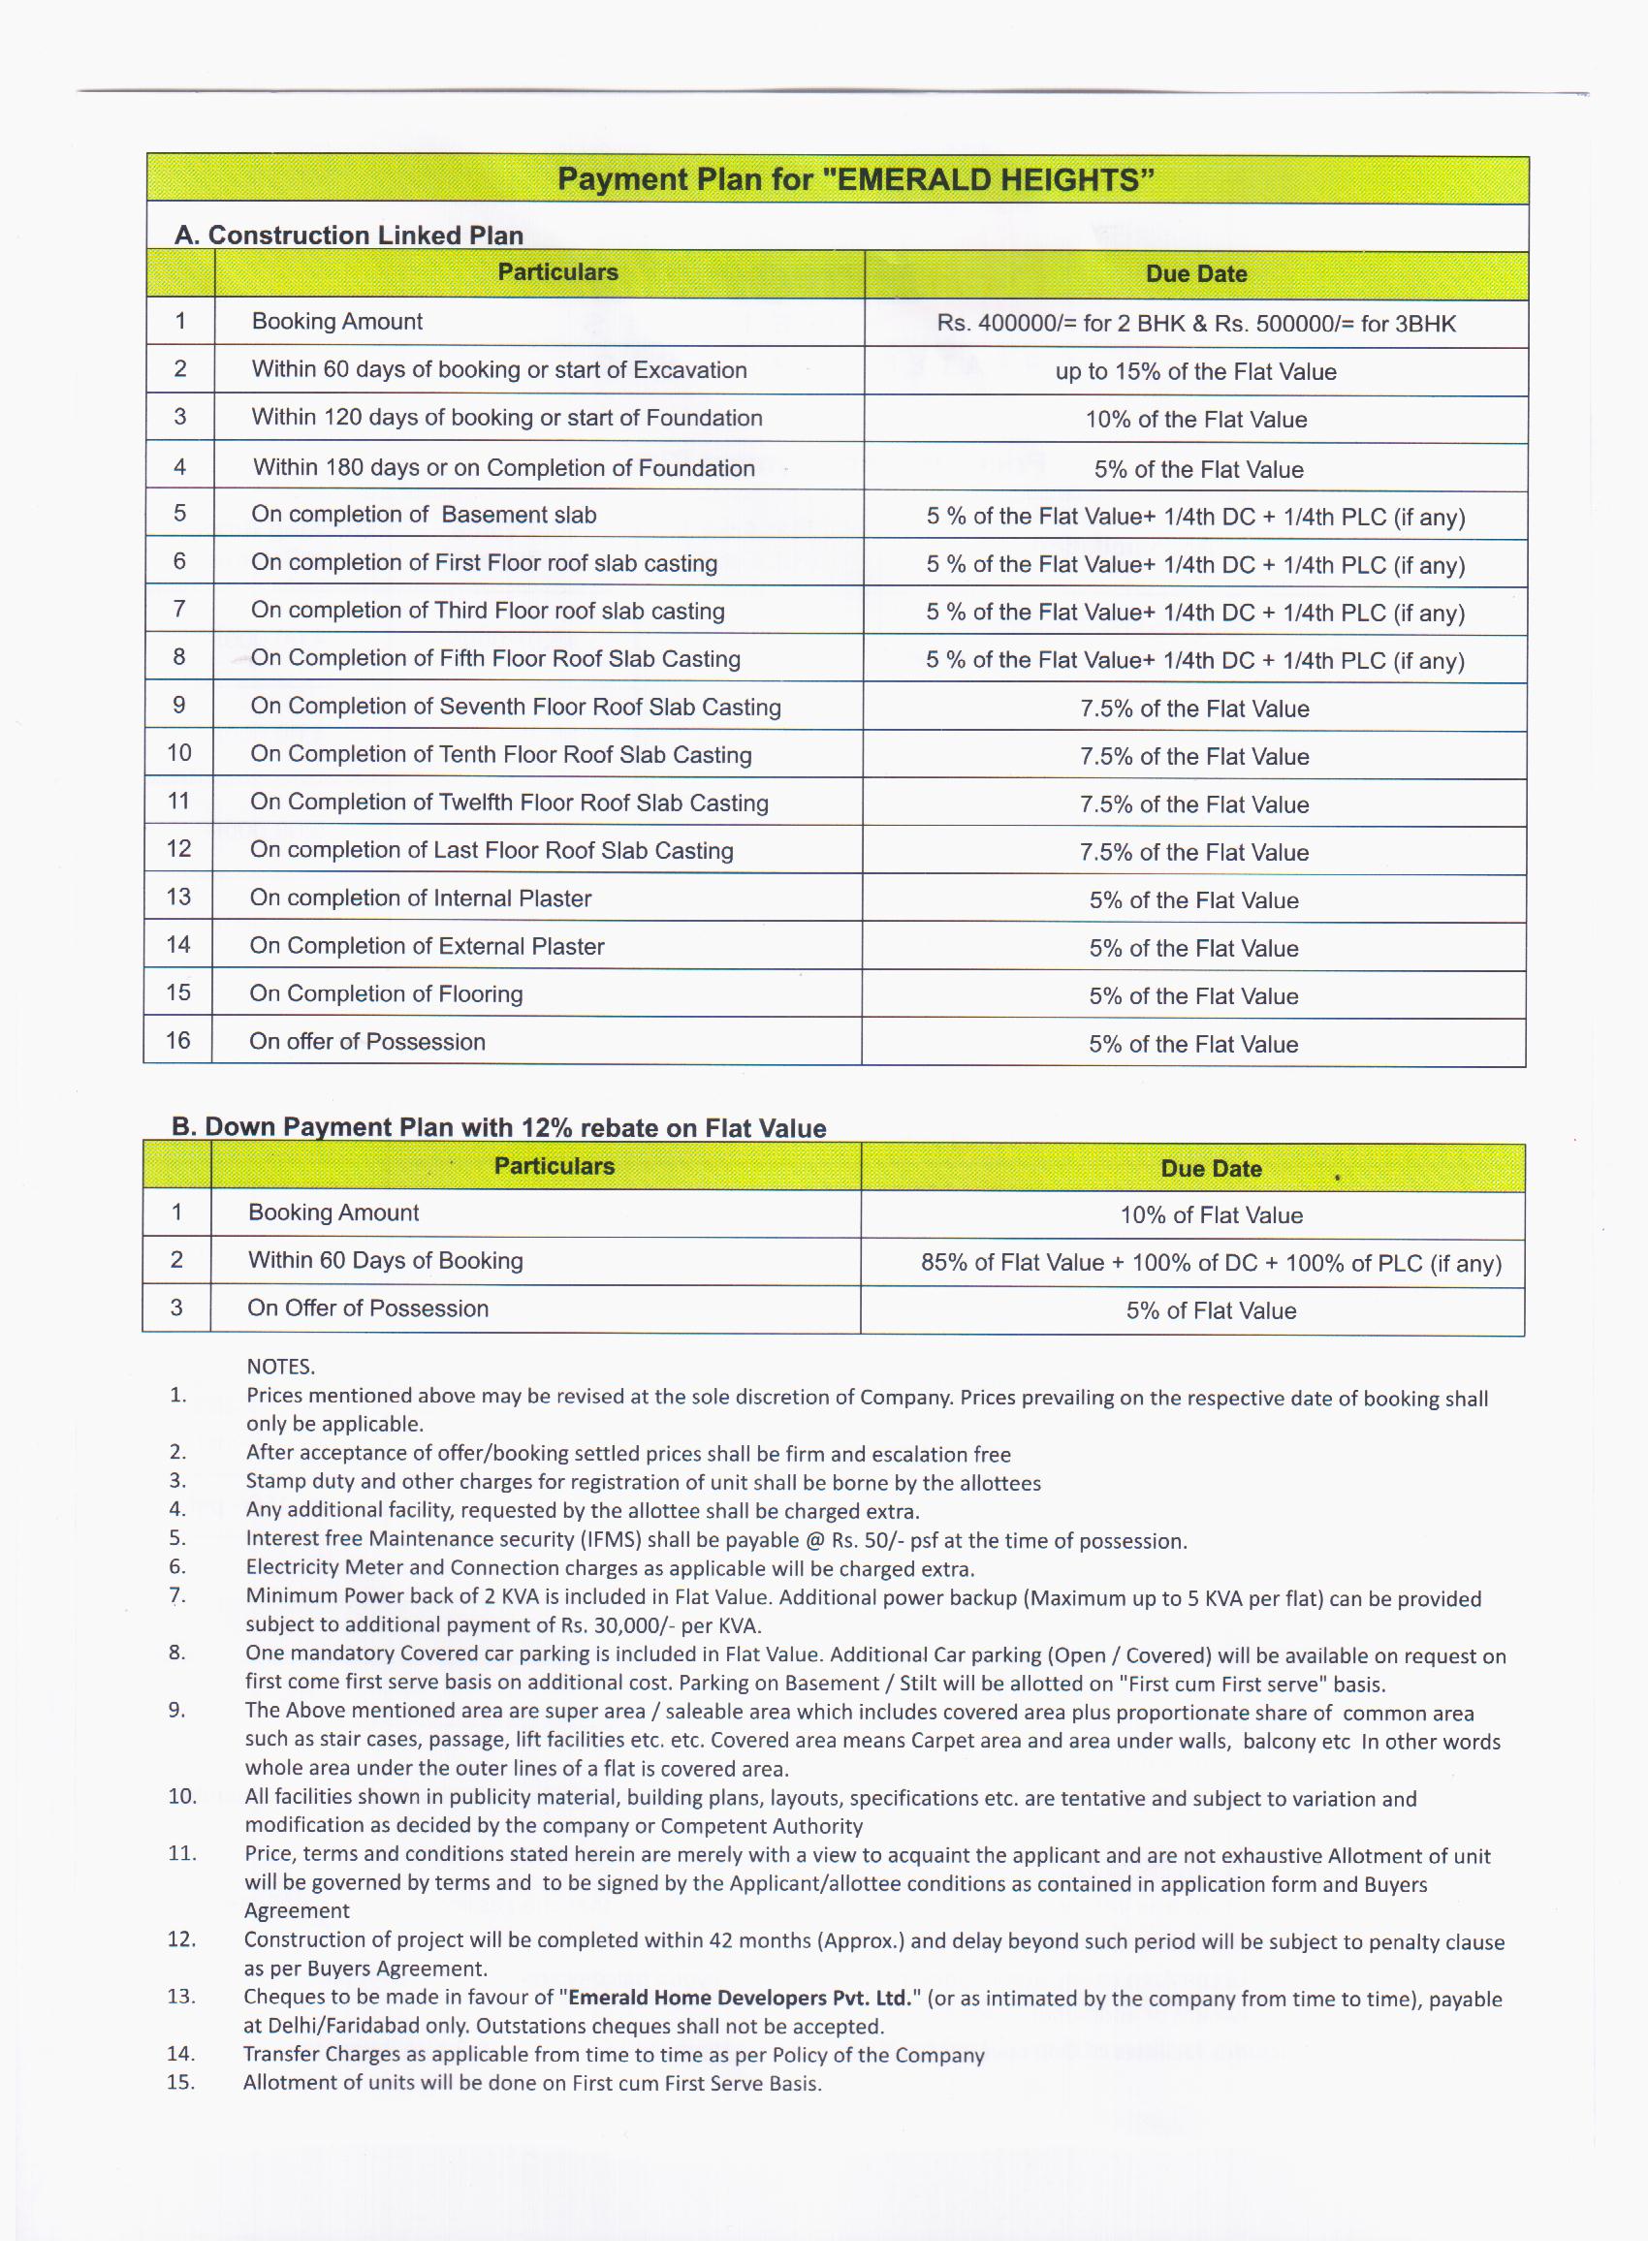 payment plan of  emerald heights faridabad